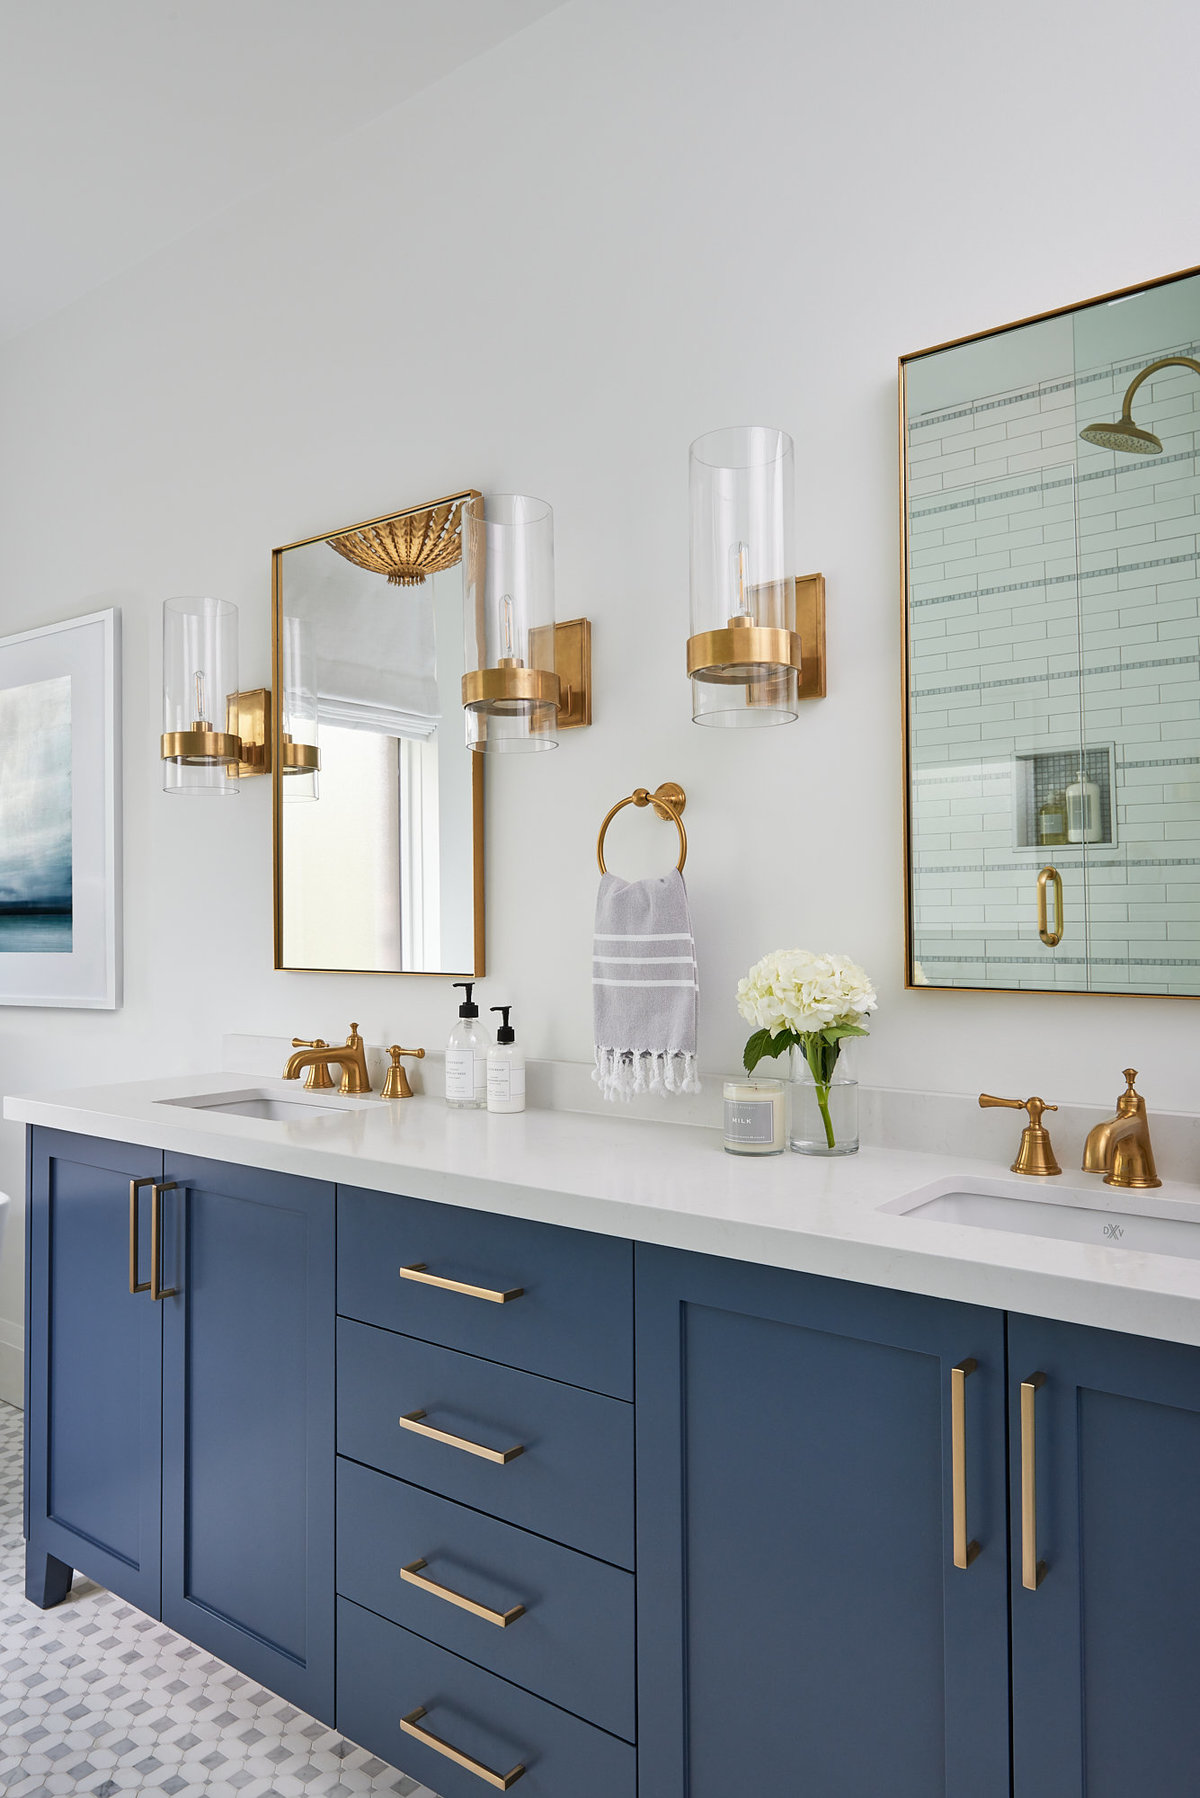 custom navy vanity in Toronto bathroom with gold mirrors and wall sconce lighting above